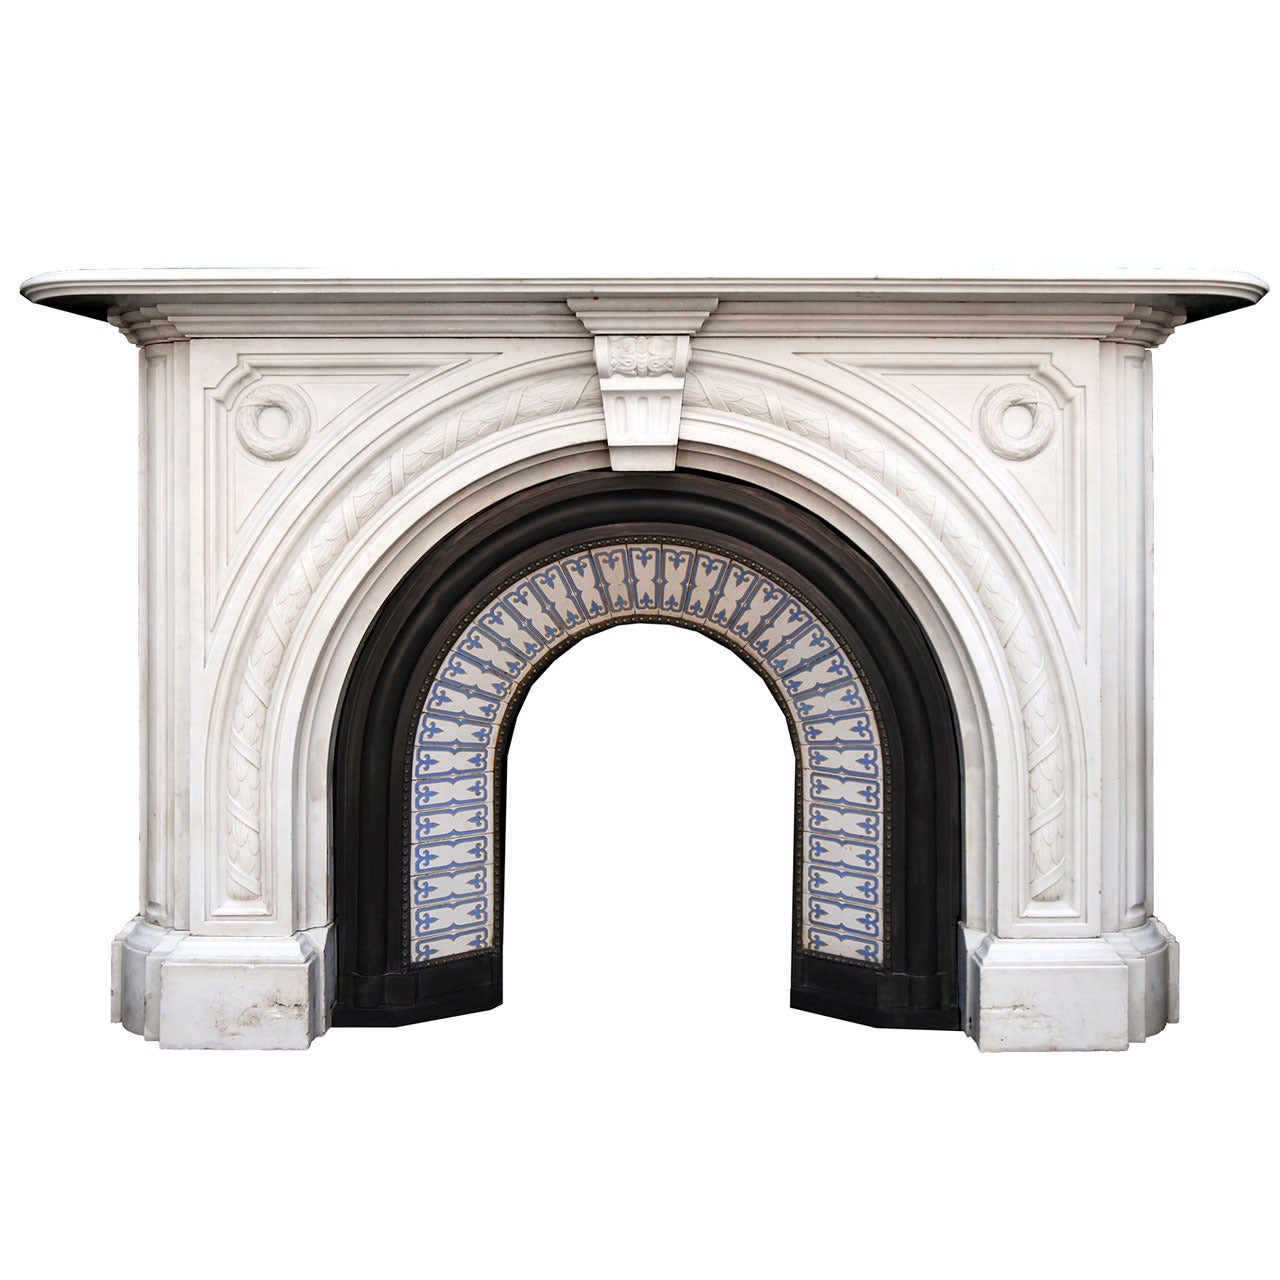 A 19th C. Victorian antique chimneypiece in Statuary marble